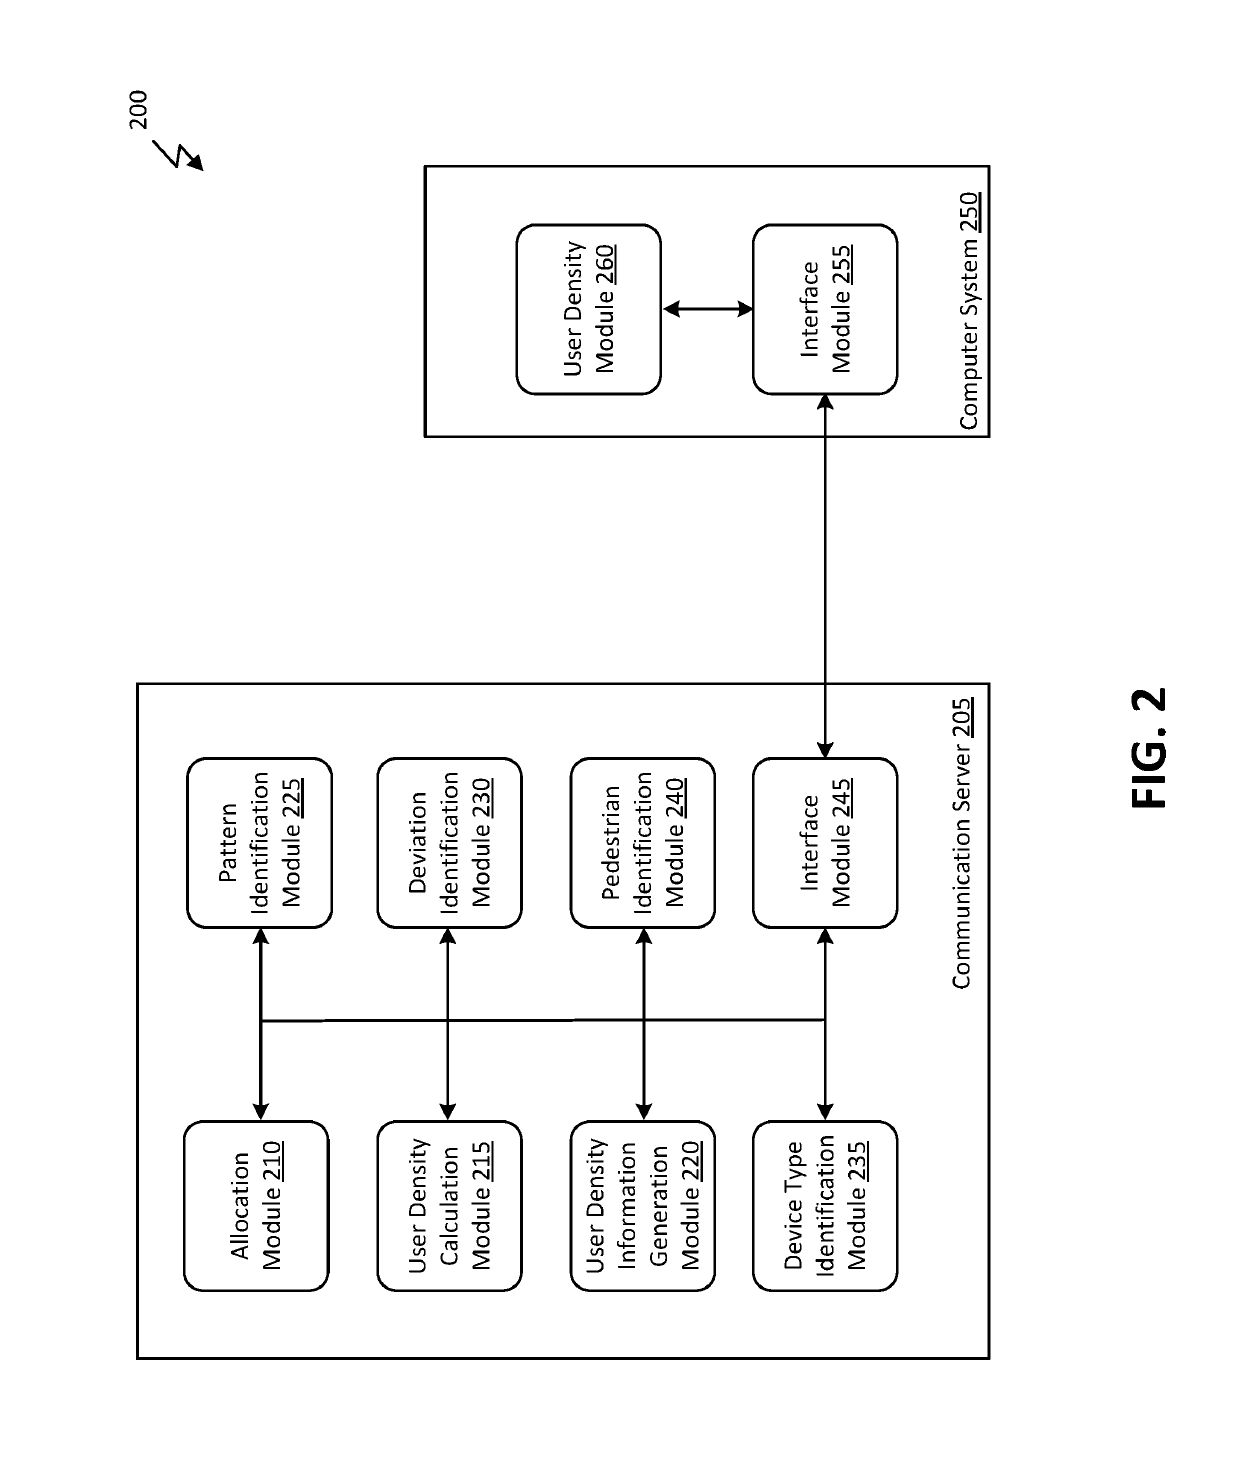 Systems and methods for identifying user density from network data